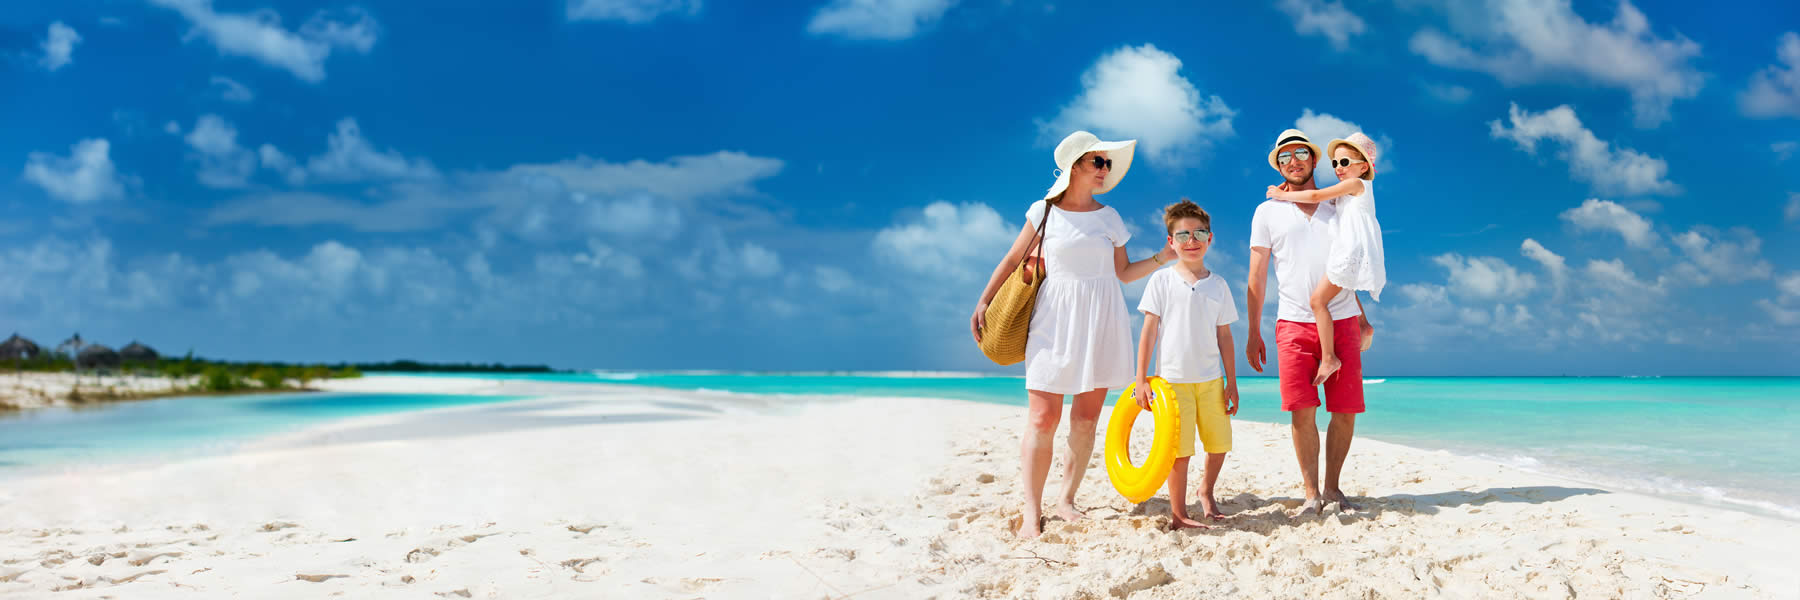 Book a great tropical family vacation with Mode Travel Agency.